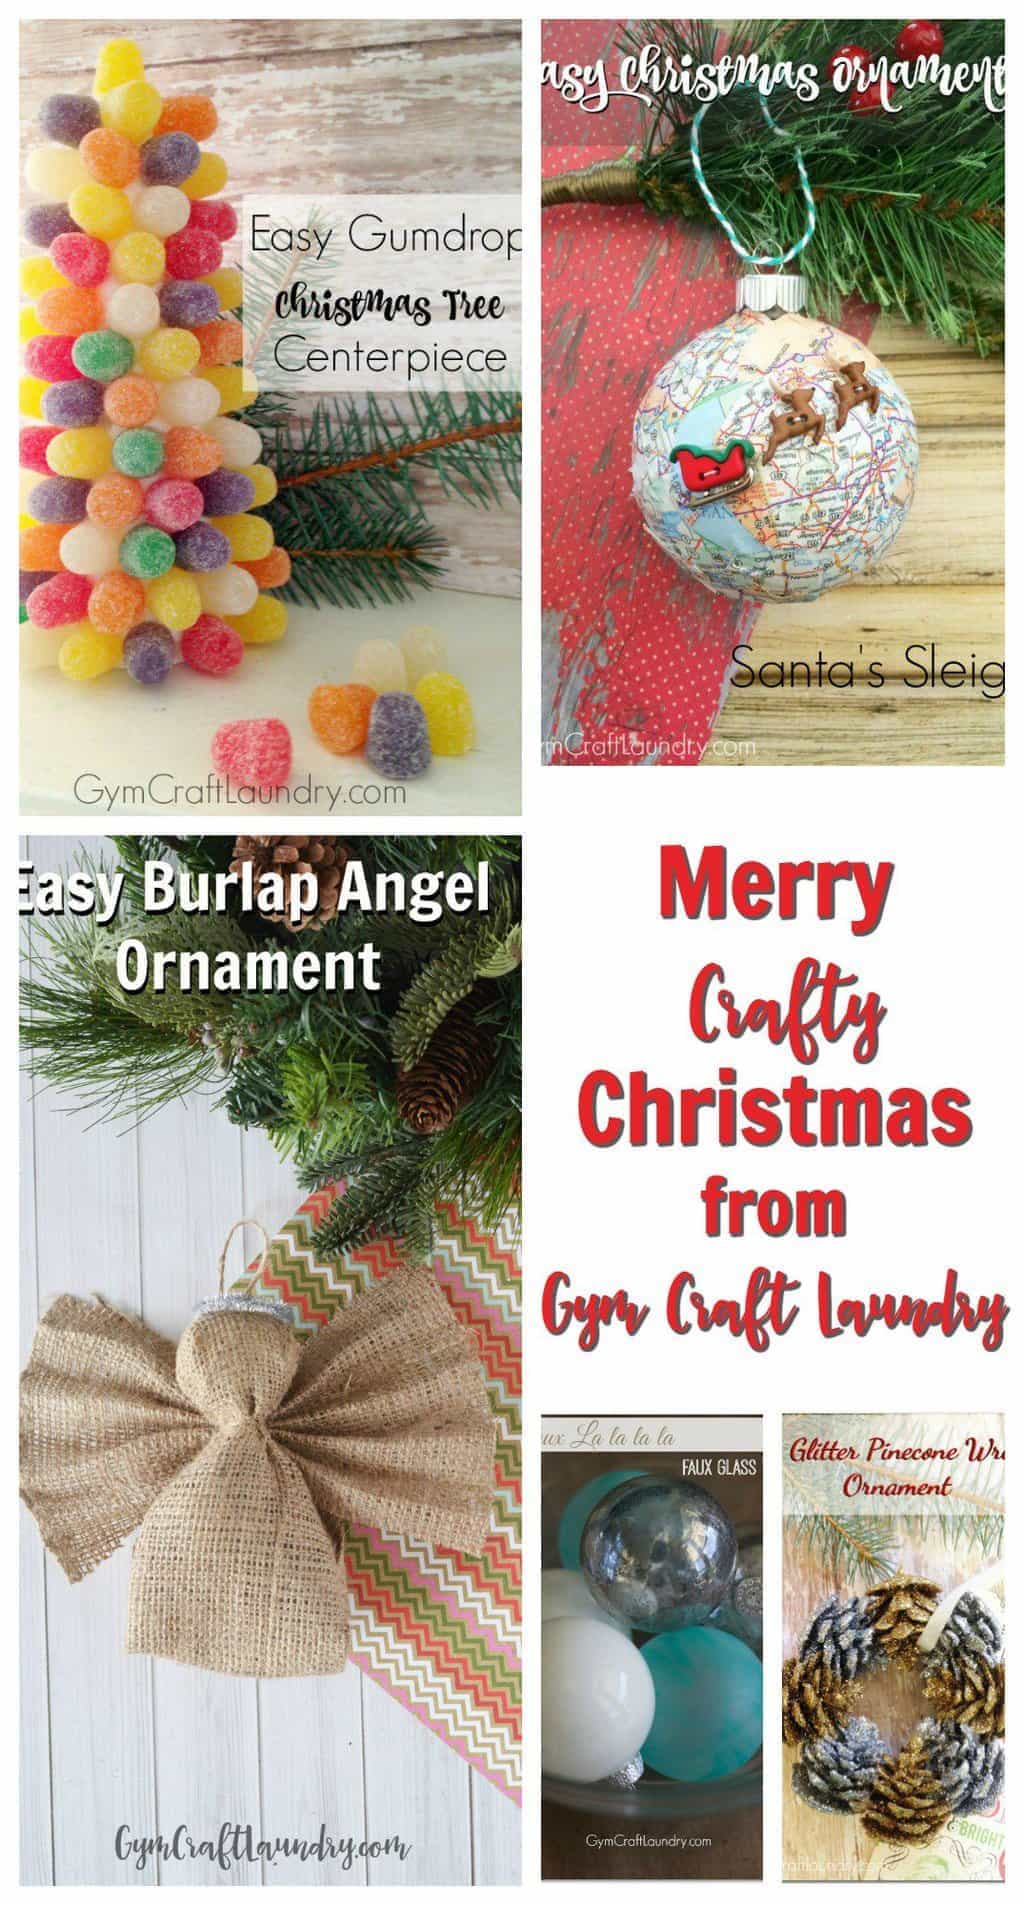 https://gymcraftlaundry.com/wp-content/uploads/2015/11/Merry-Crafty-Christmas-from-Gym-Craft-Laundry.jpg